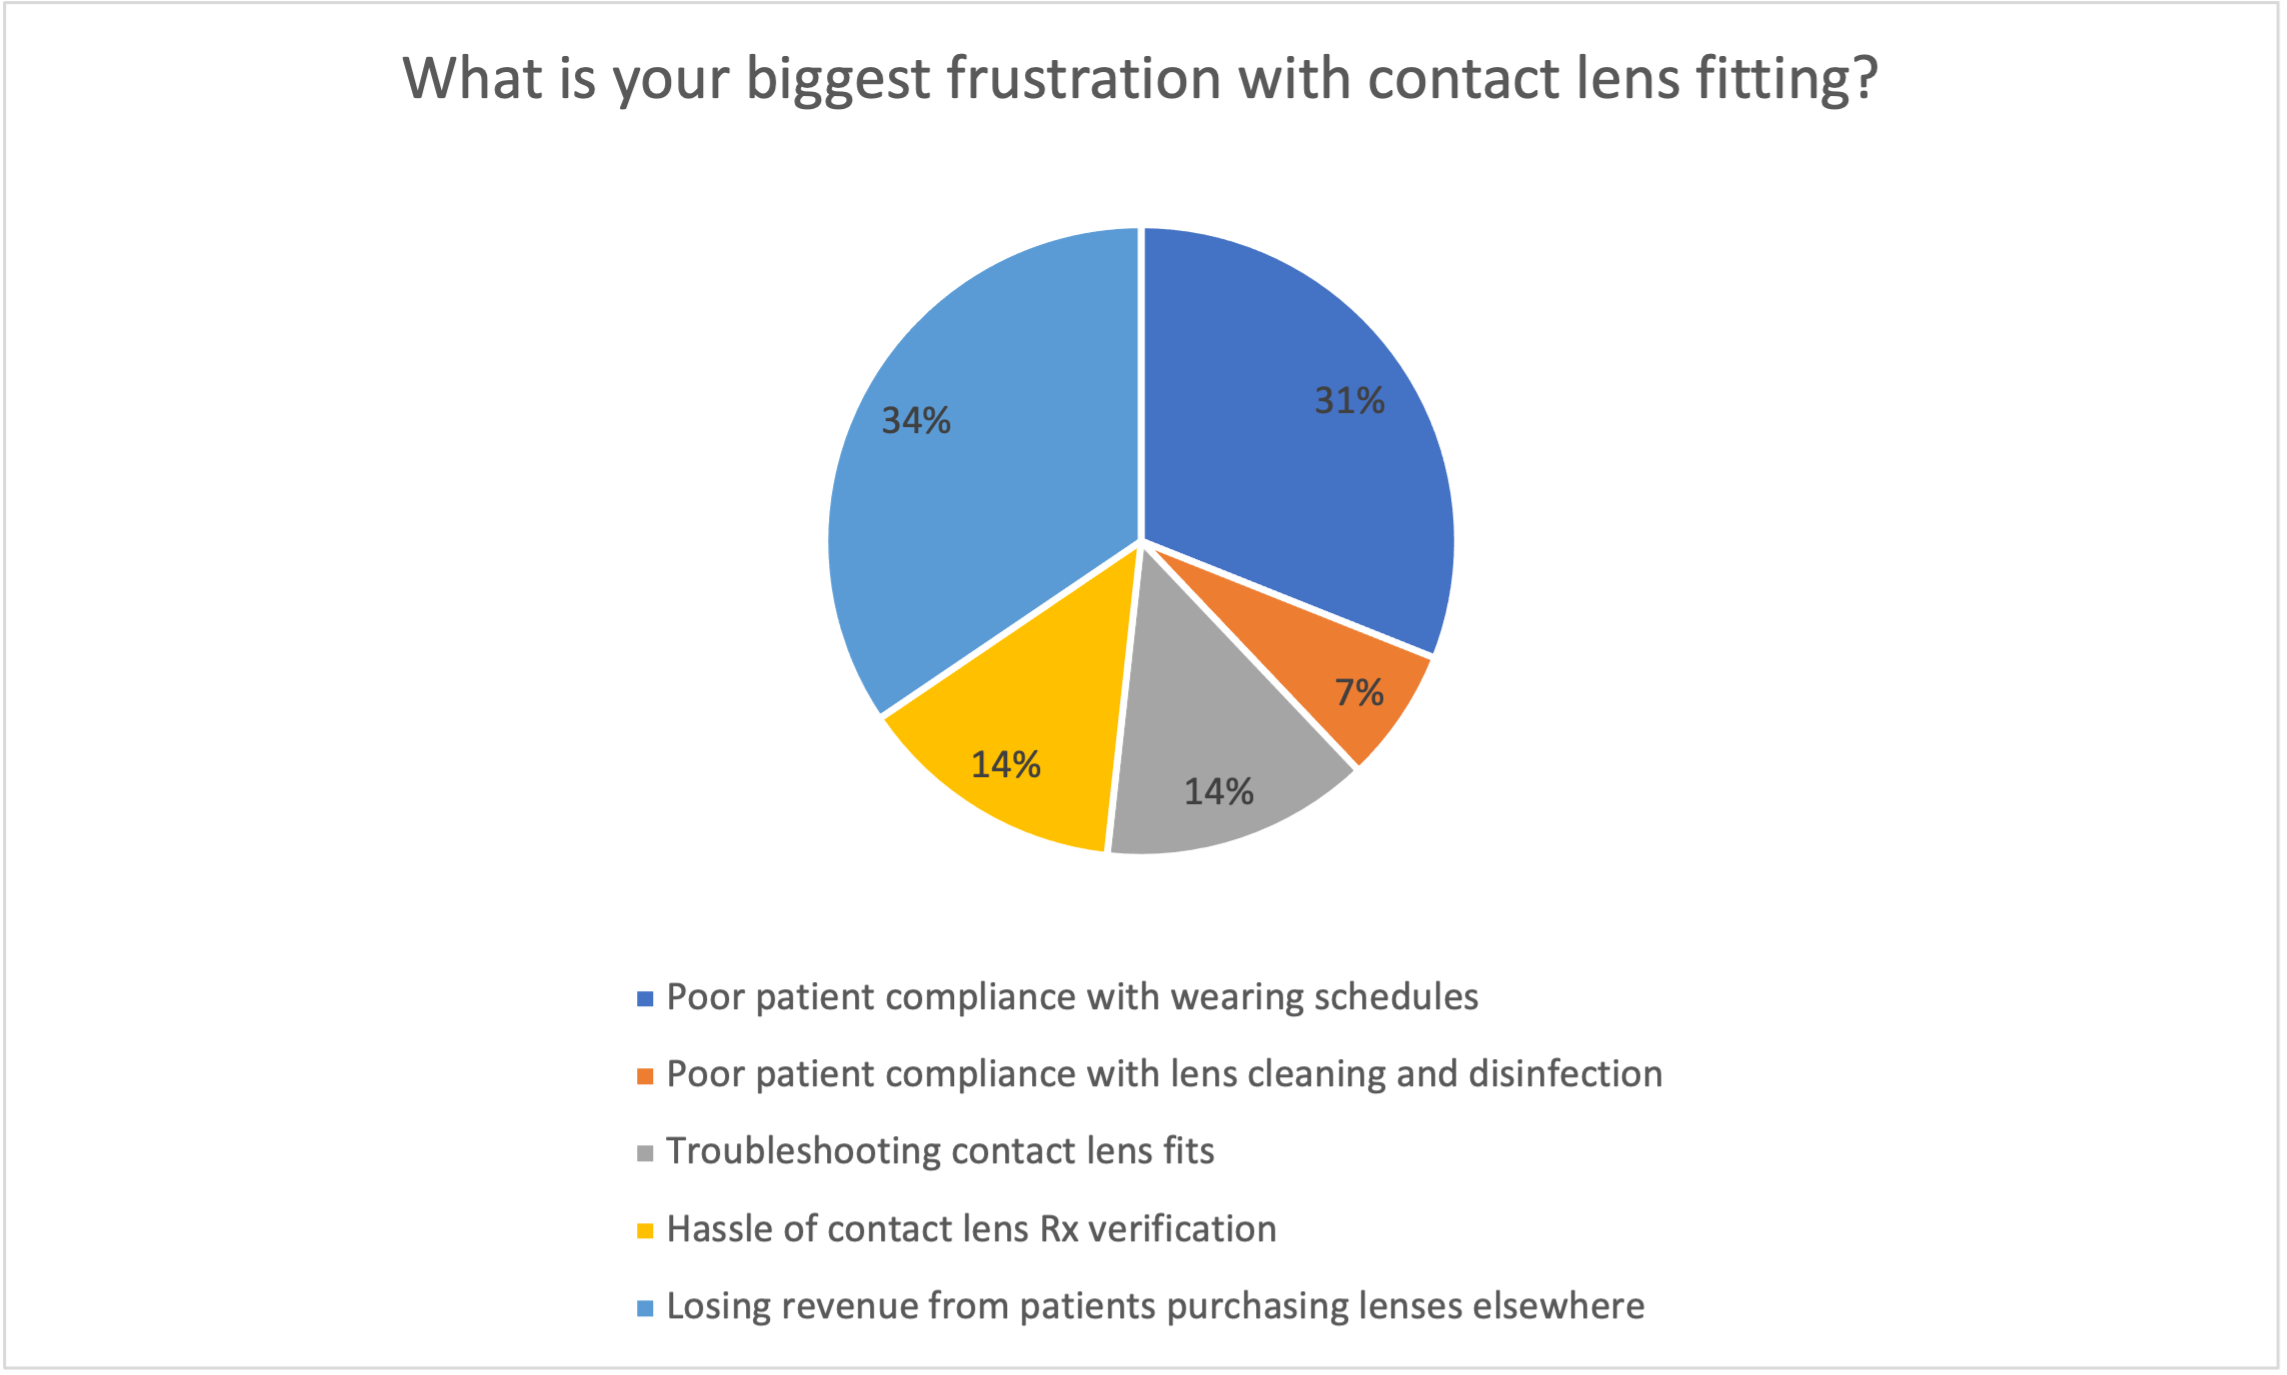 Poll Results: What is your biggest frustration with contact lens fitting?